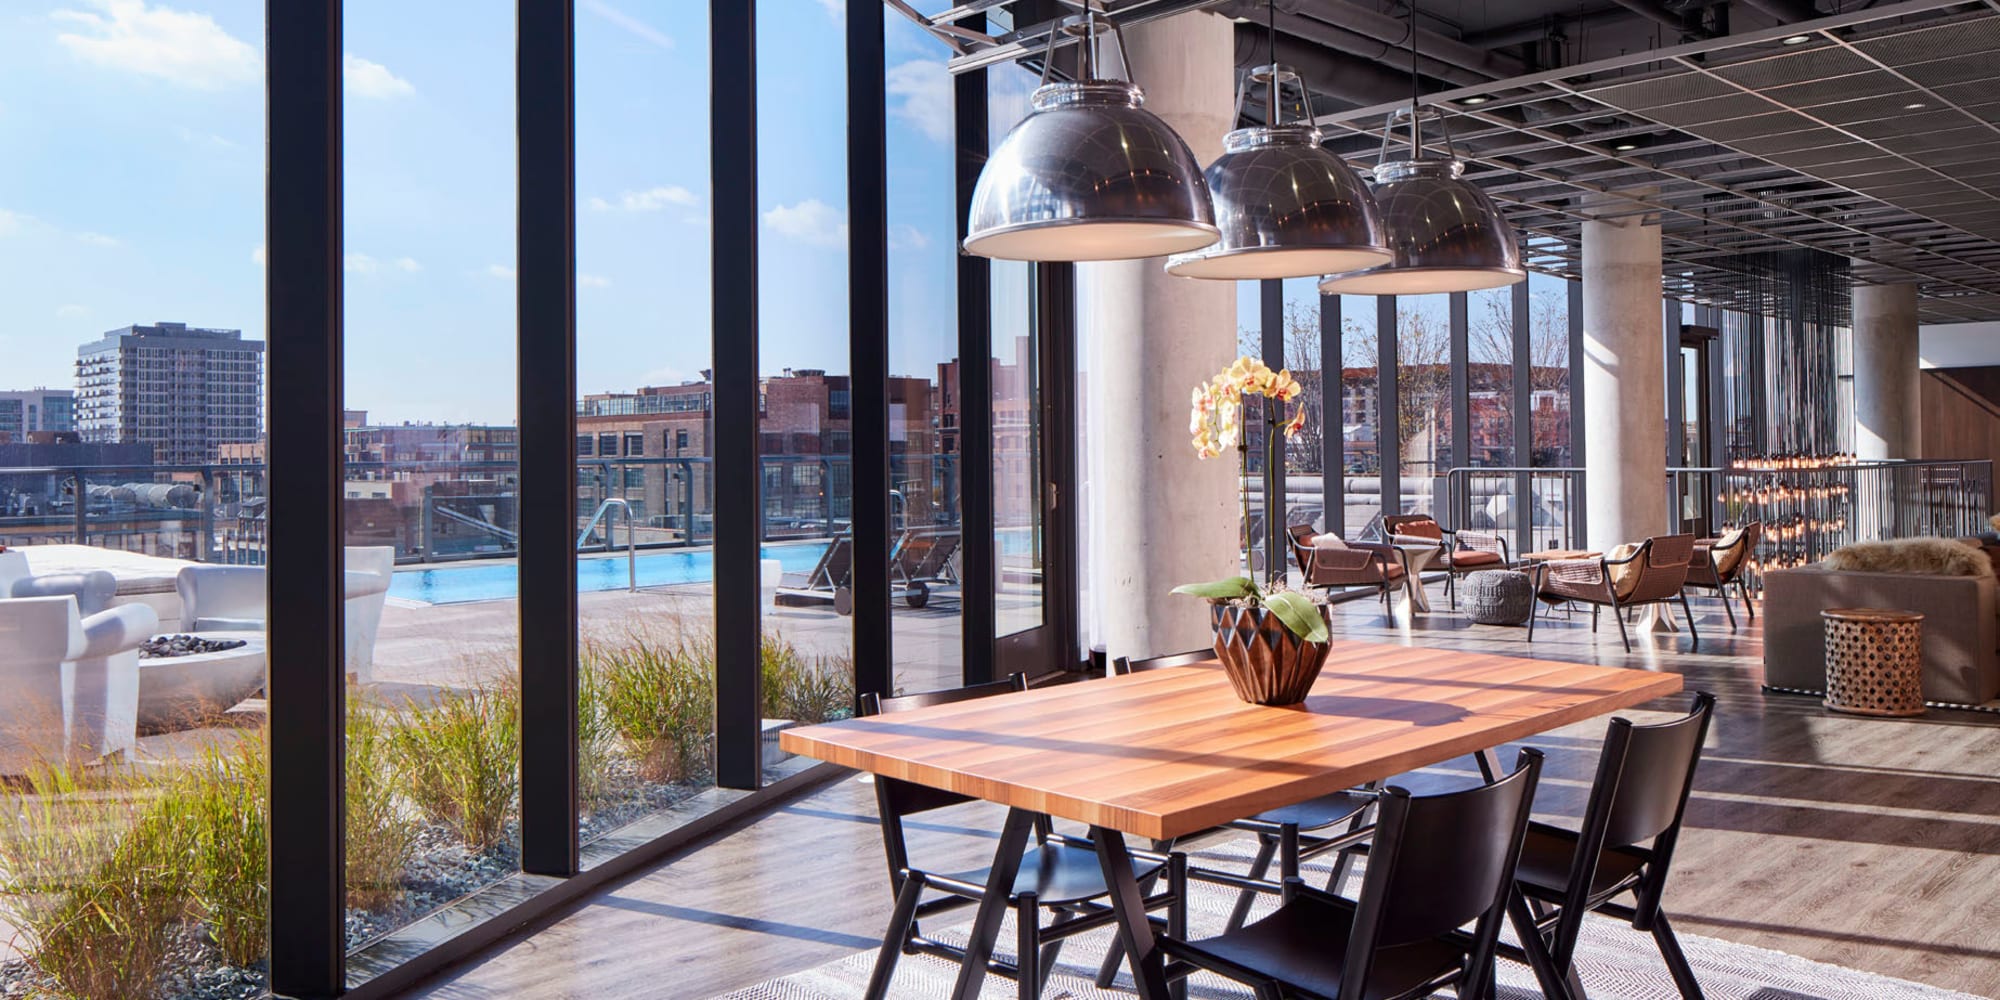 Gorgeous dining area with amazing city views at The Parker Fulton Market in Chicago, Illinois